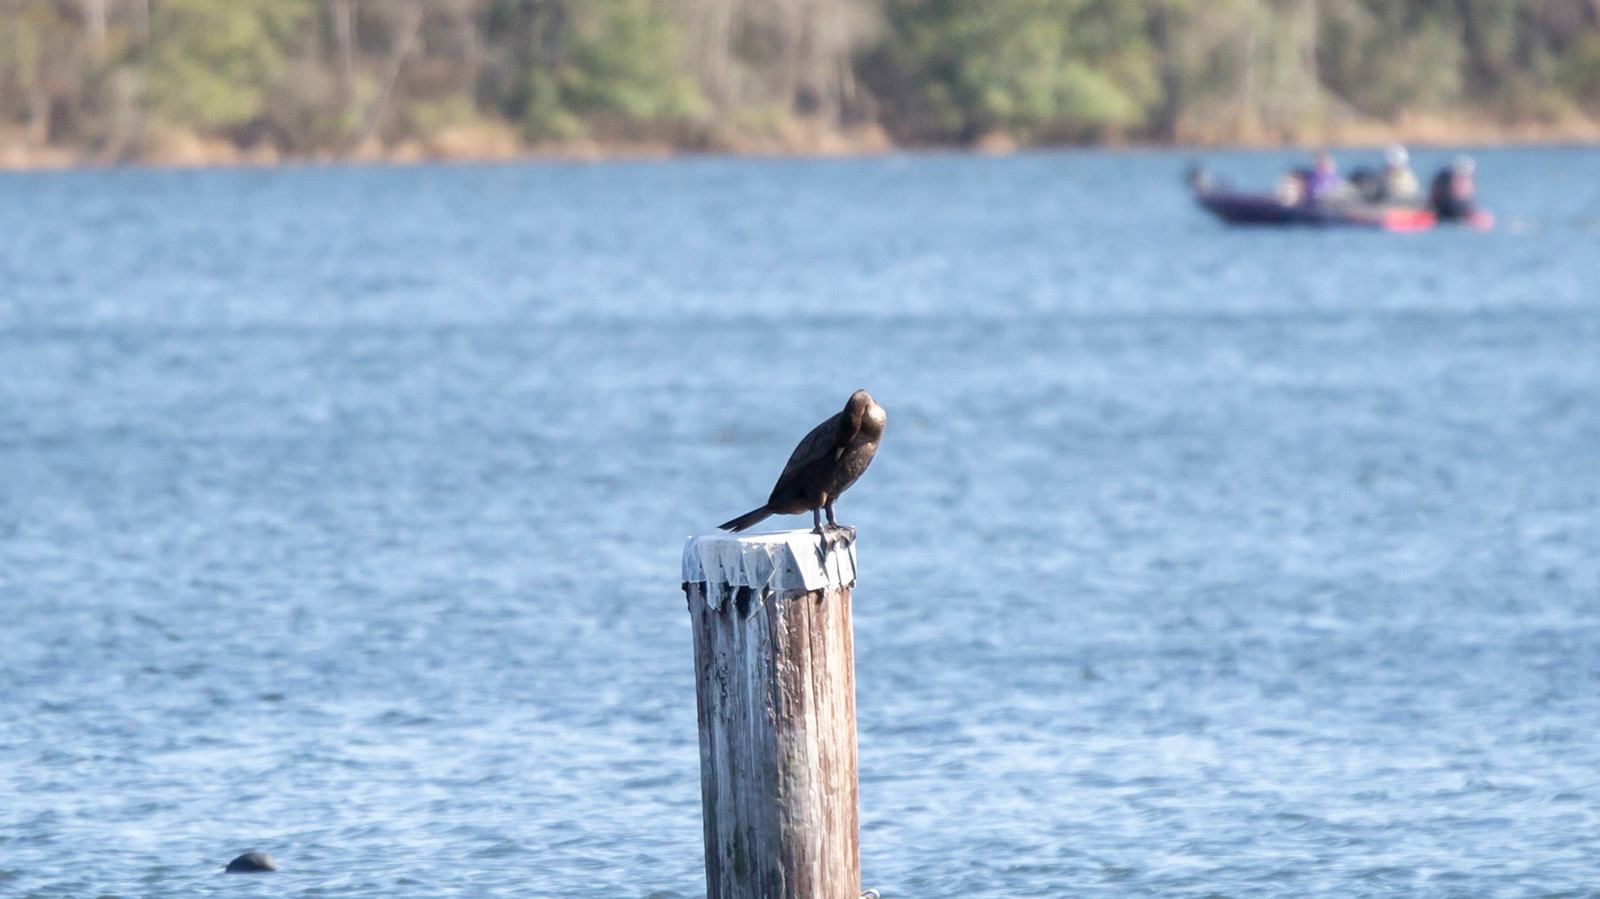 Double-crested cormorant perched on a wooden pole